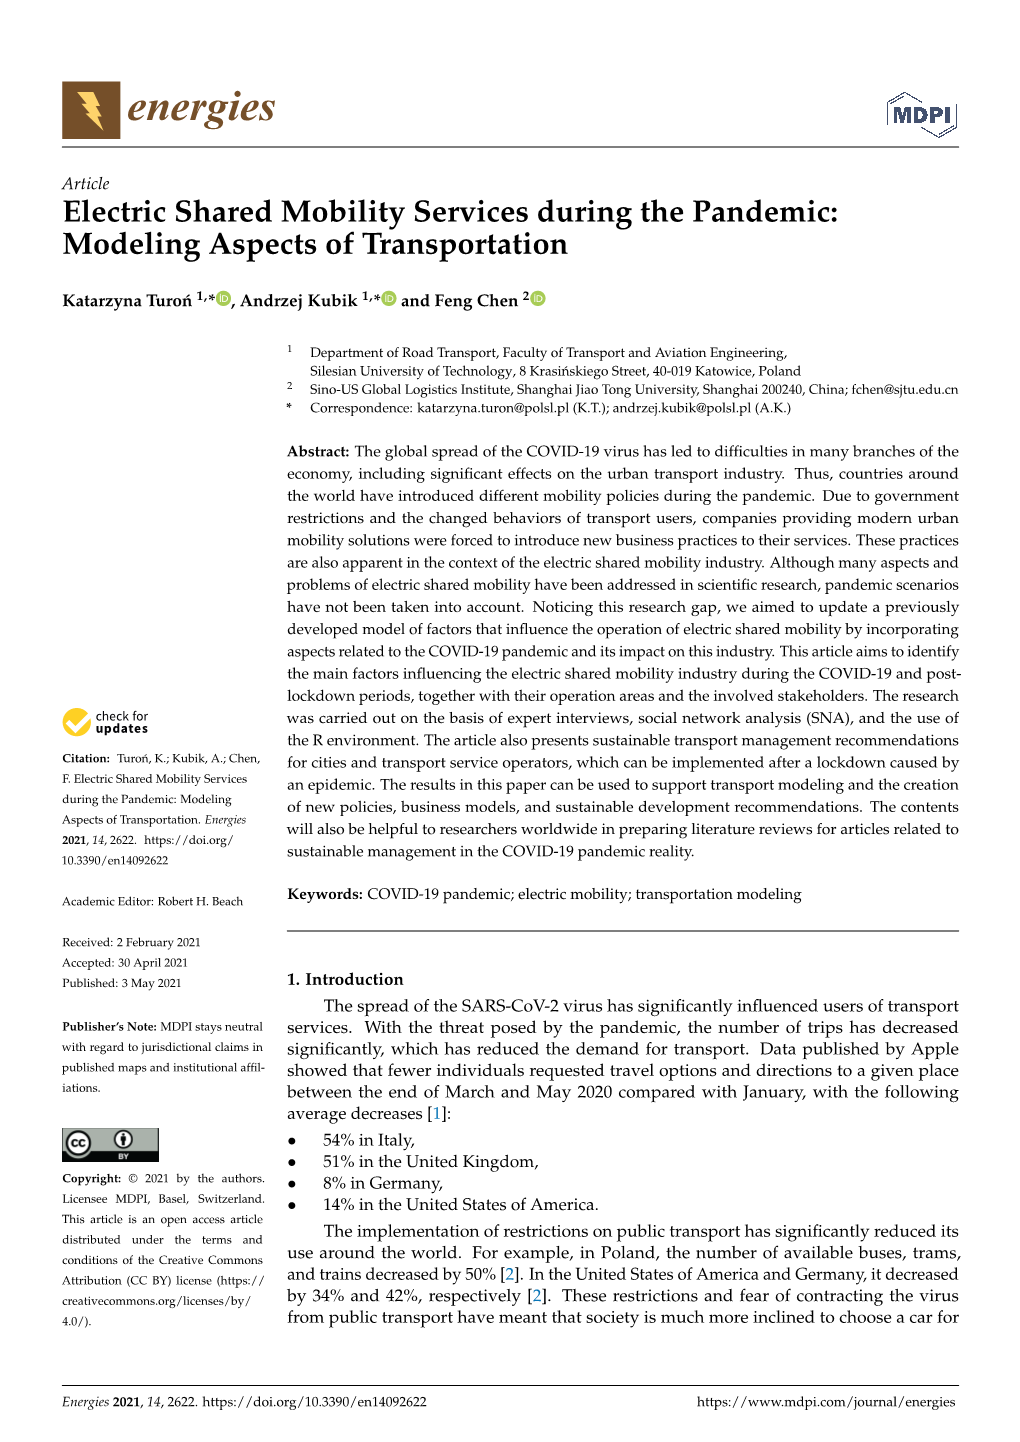 Electric Shared Mobility Services During the Pandemic: Modeling Aspects of Transportation